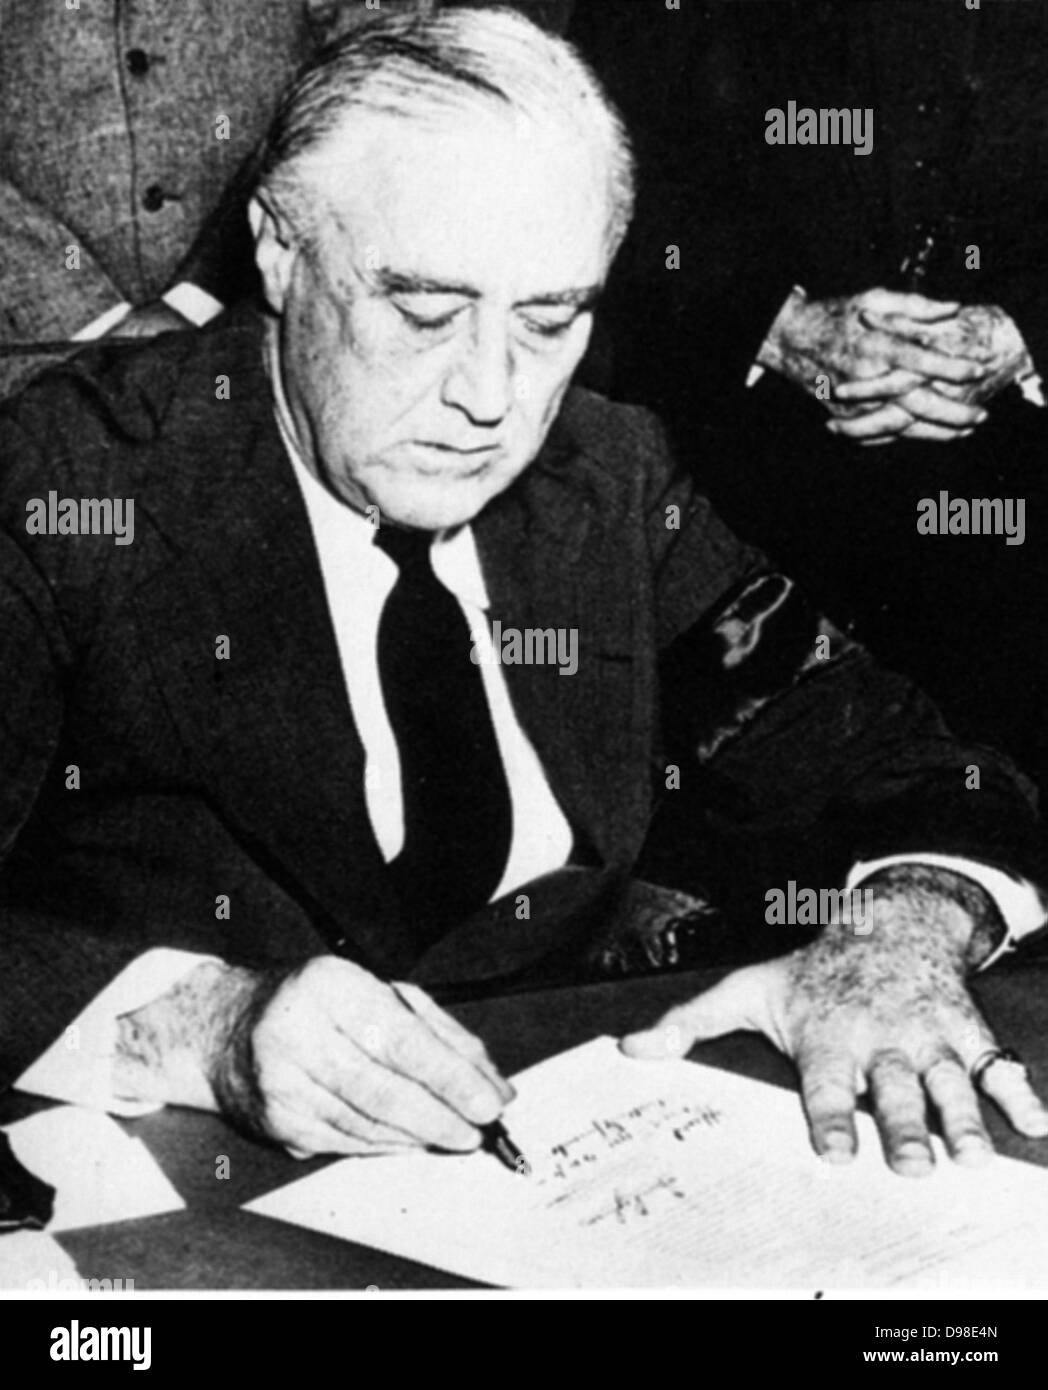 Franklin Delano Roosevelt (1882-1945) 32nd President of the United States of America 1933-1945, signing the declaration of war against Japan, 8 December 1941. Second World War. Stock Photo